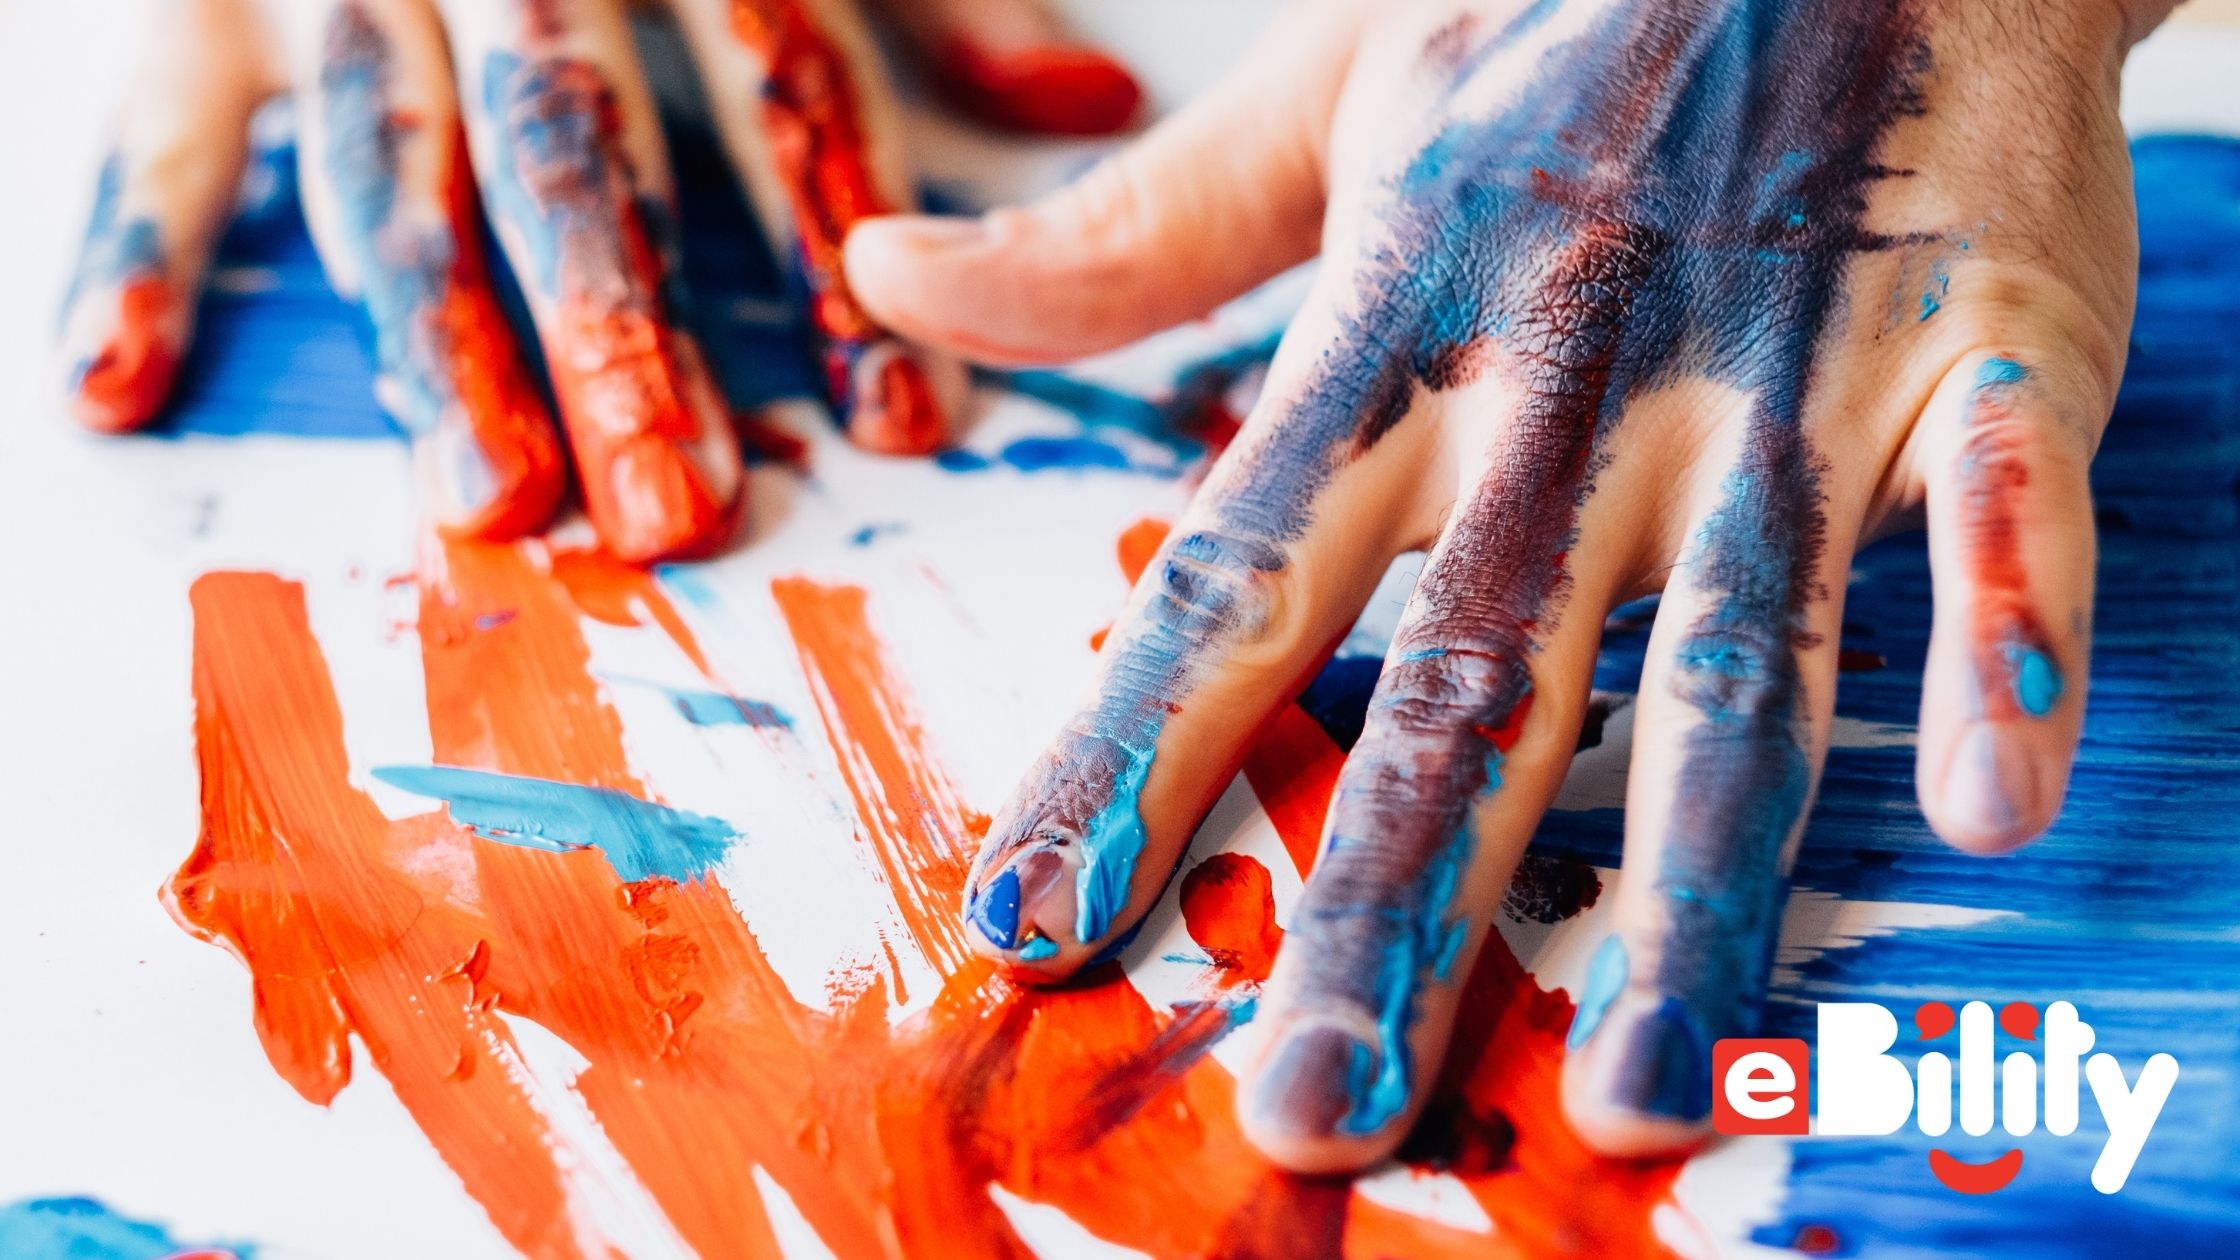 hands and paper covered in blue and orange paint. eBility